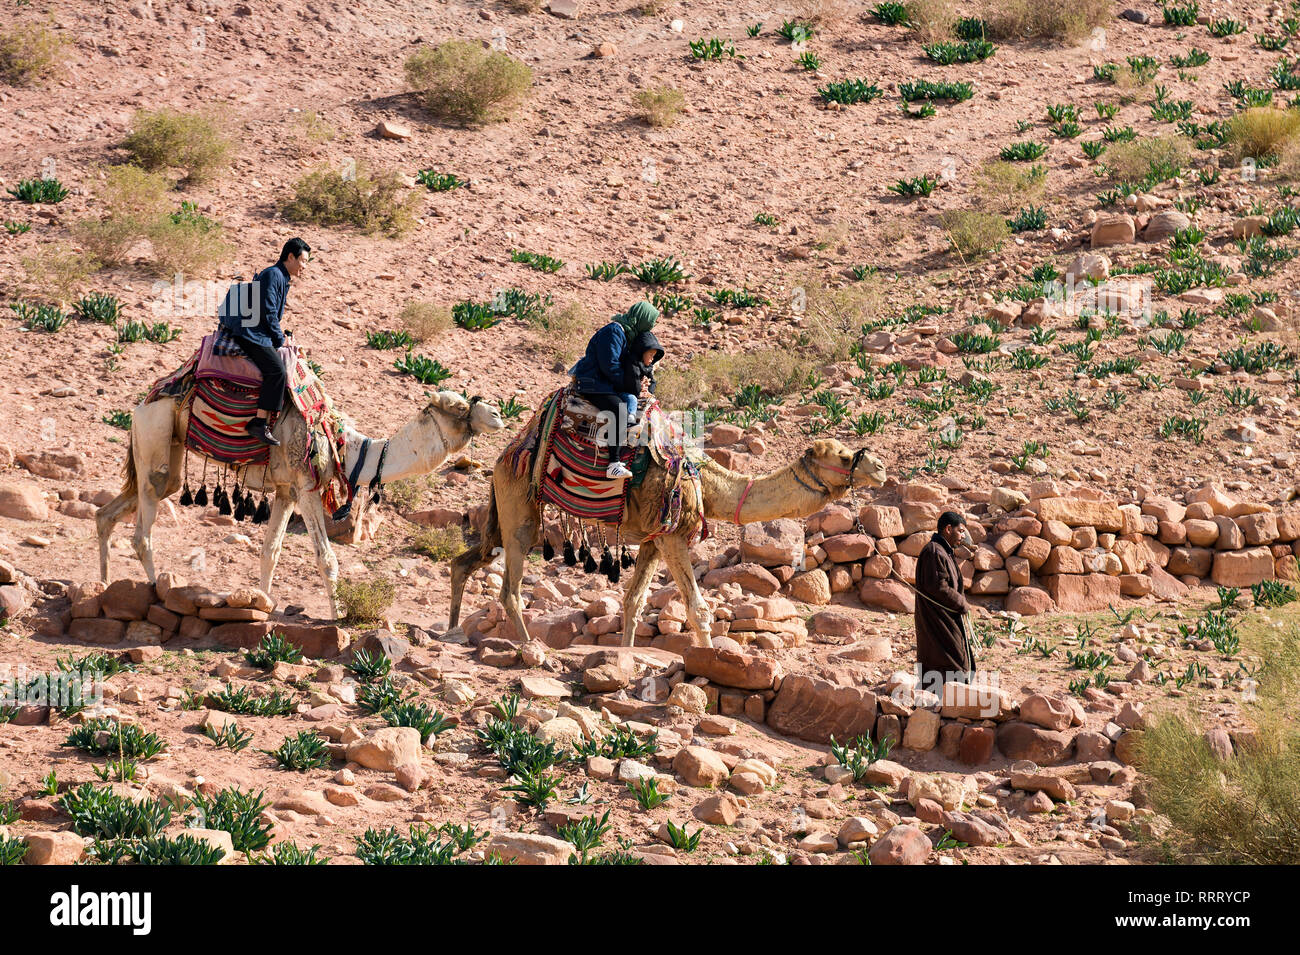 A family is doing a camel tour while a Bedouin is leading them in the beautiful archaeological site of Petra. Stock Photo